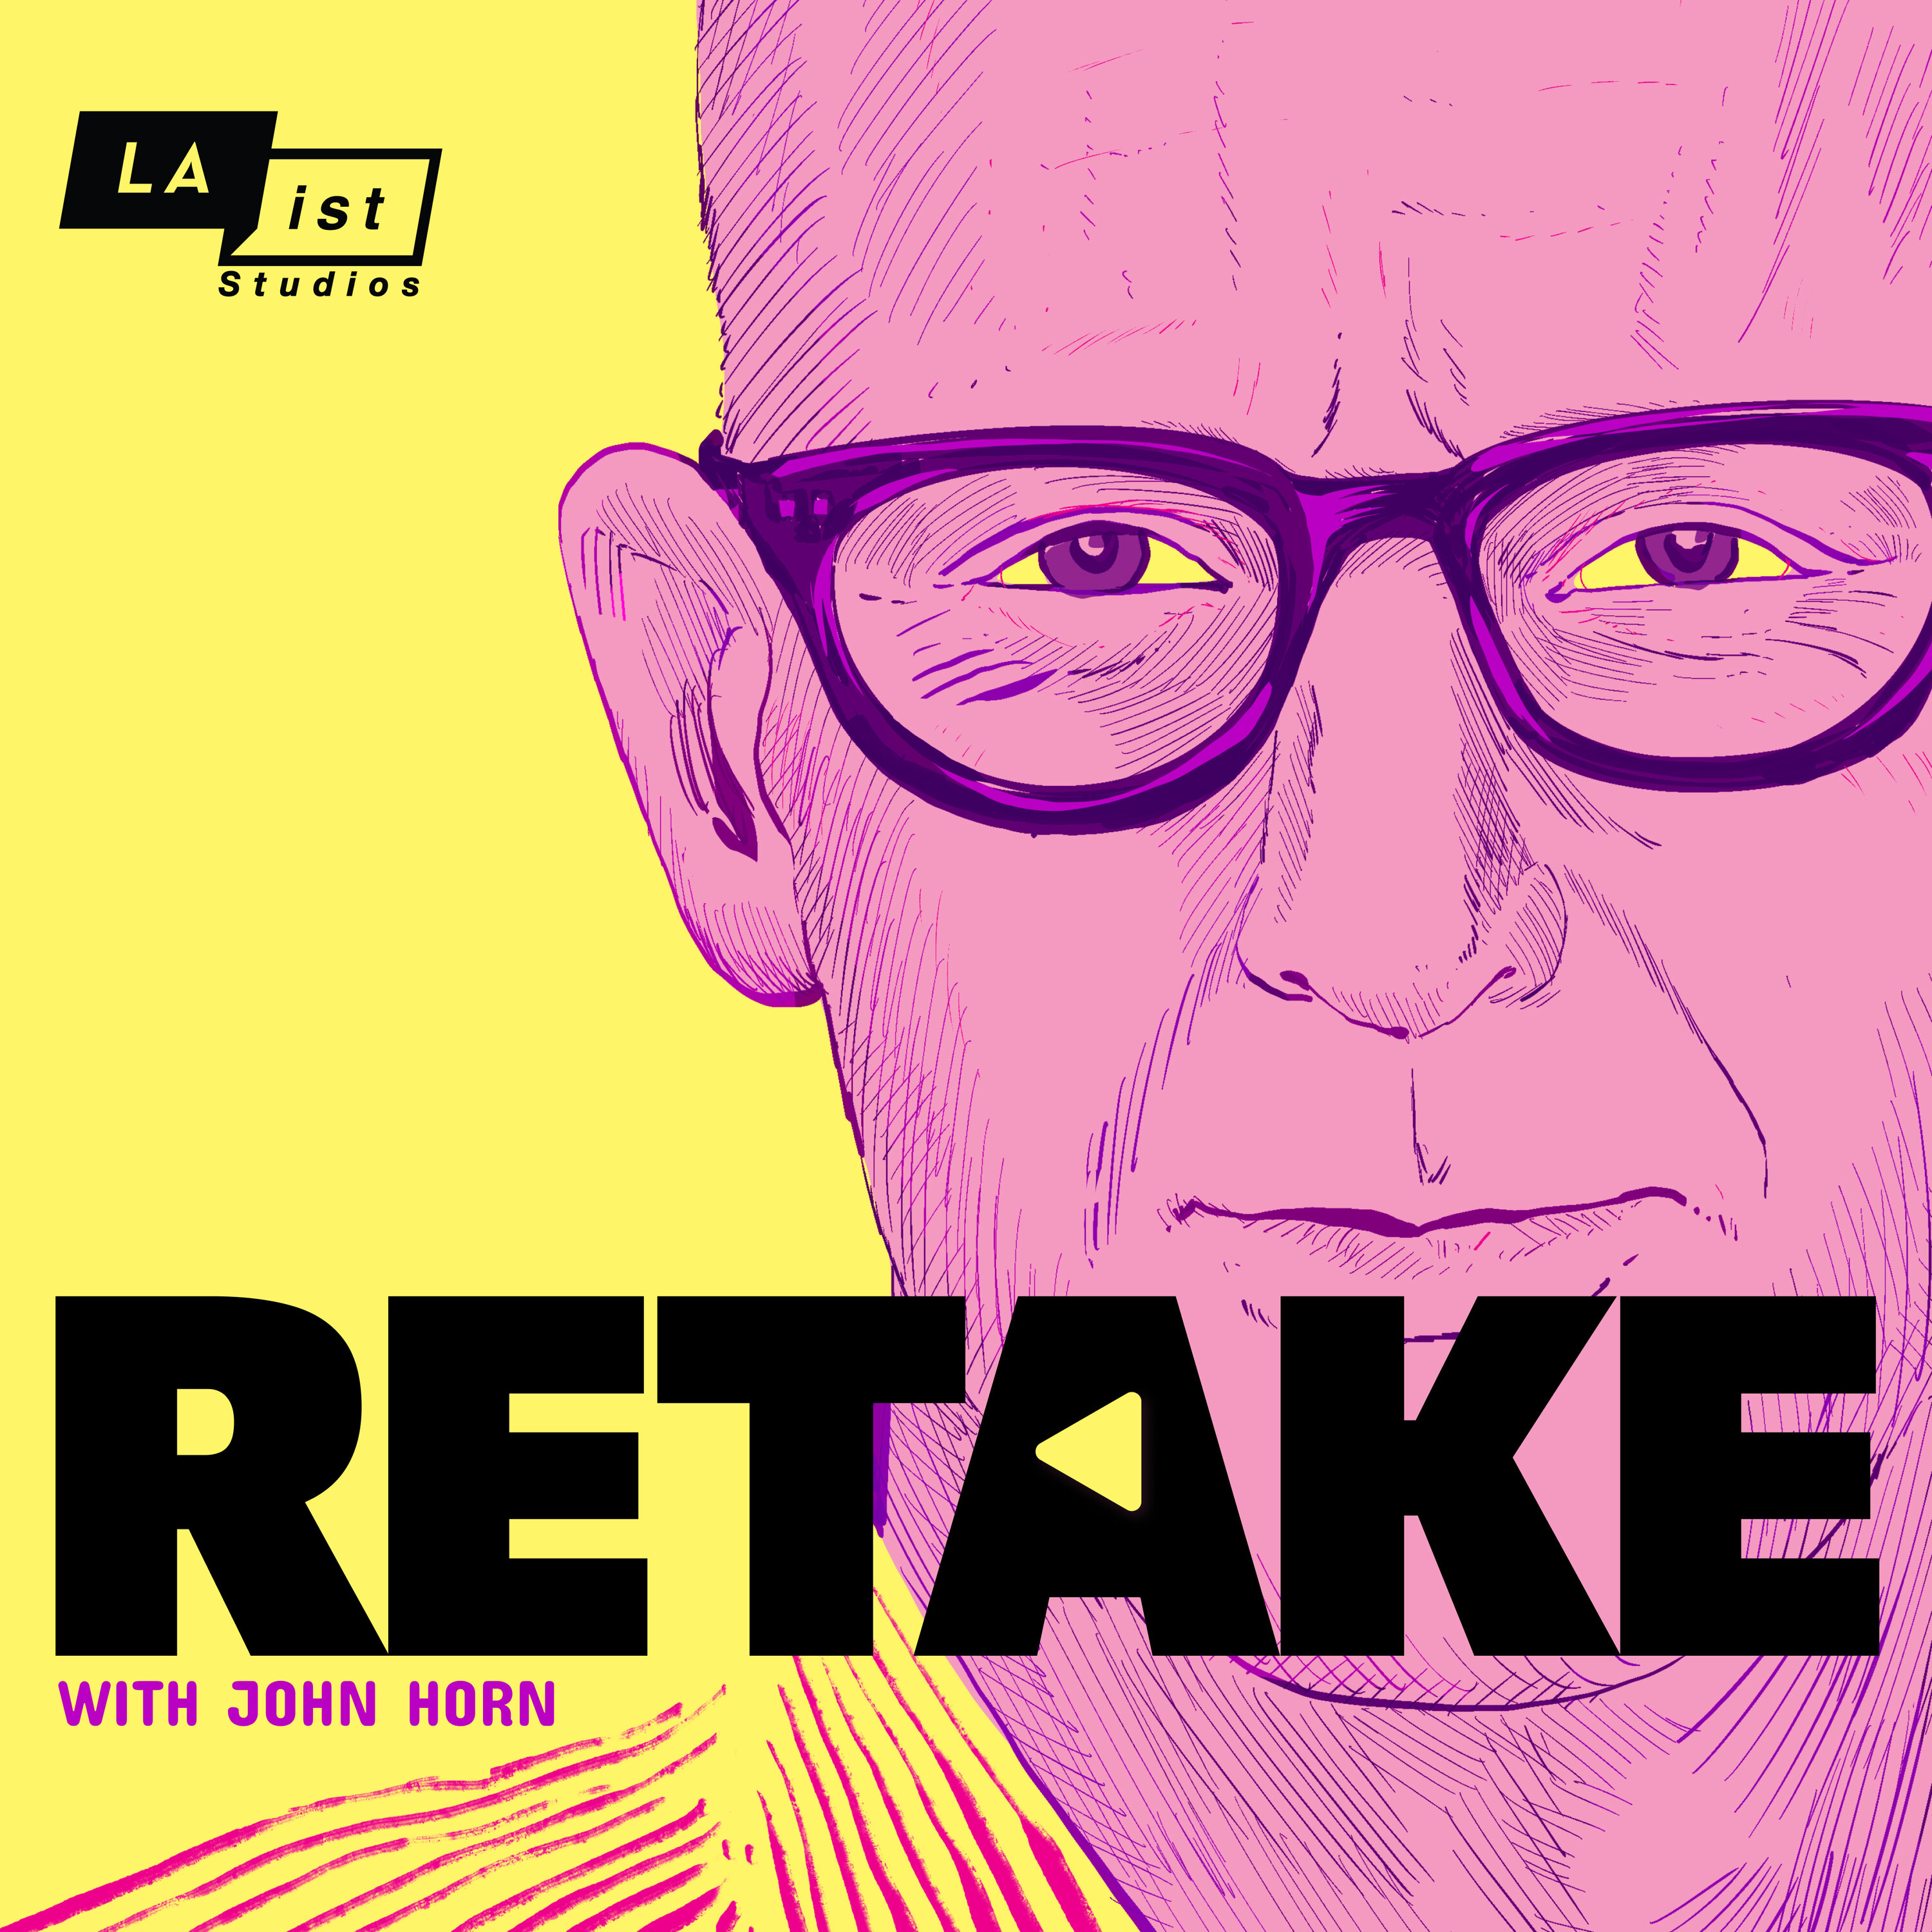 Introducing Retake with John Horn, from LAist Studios